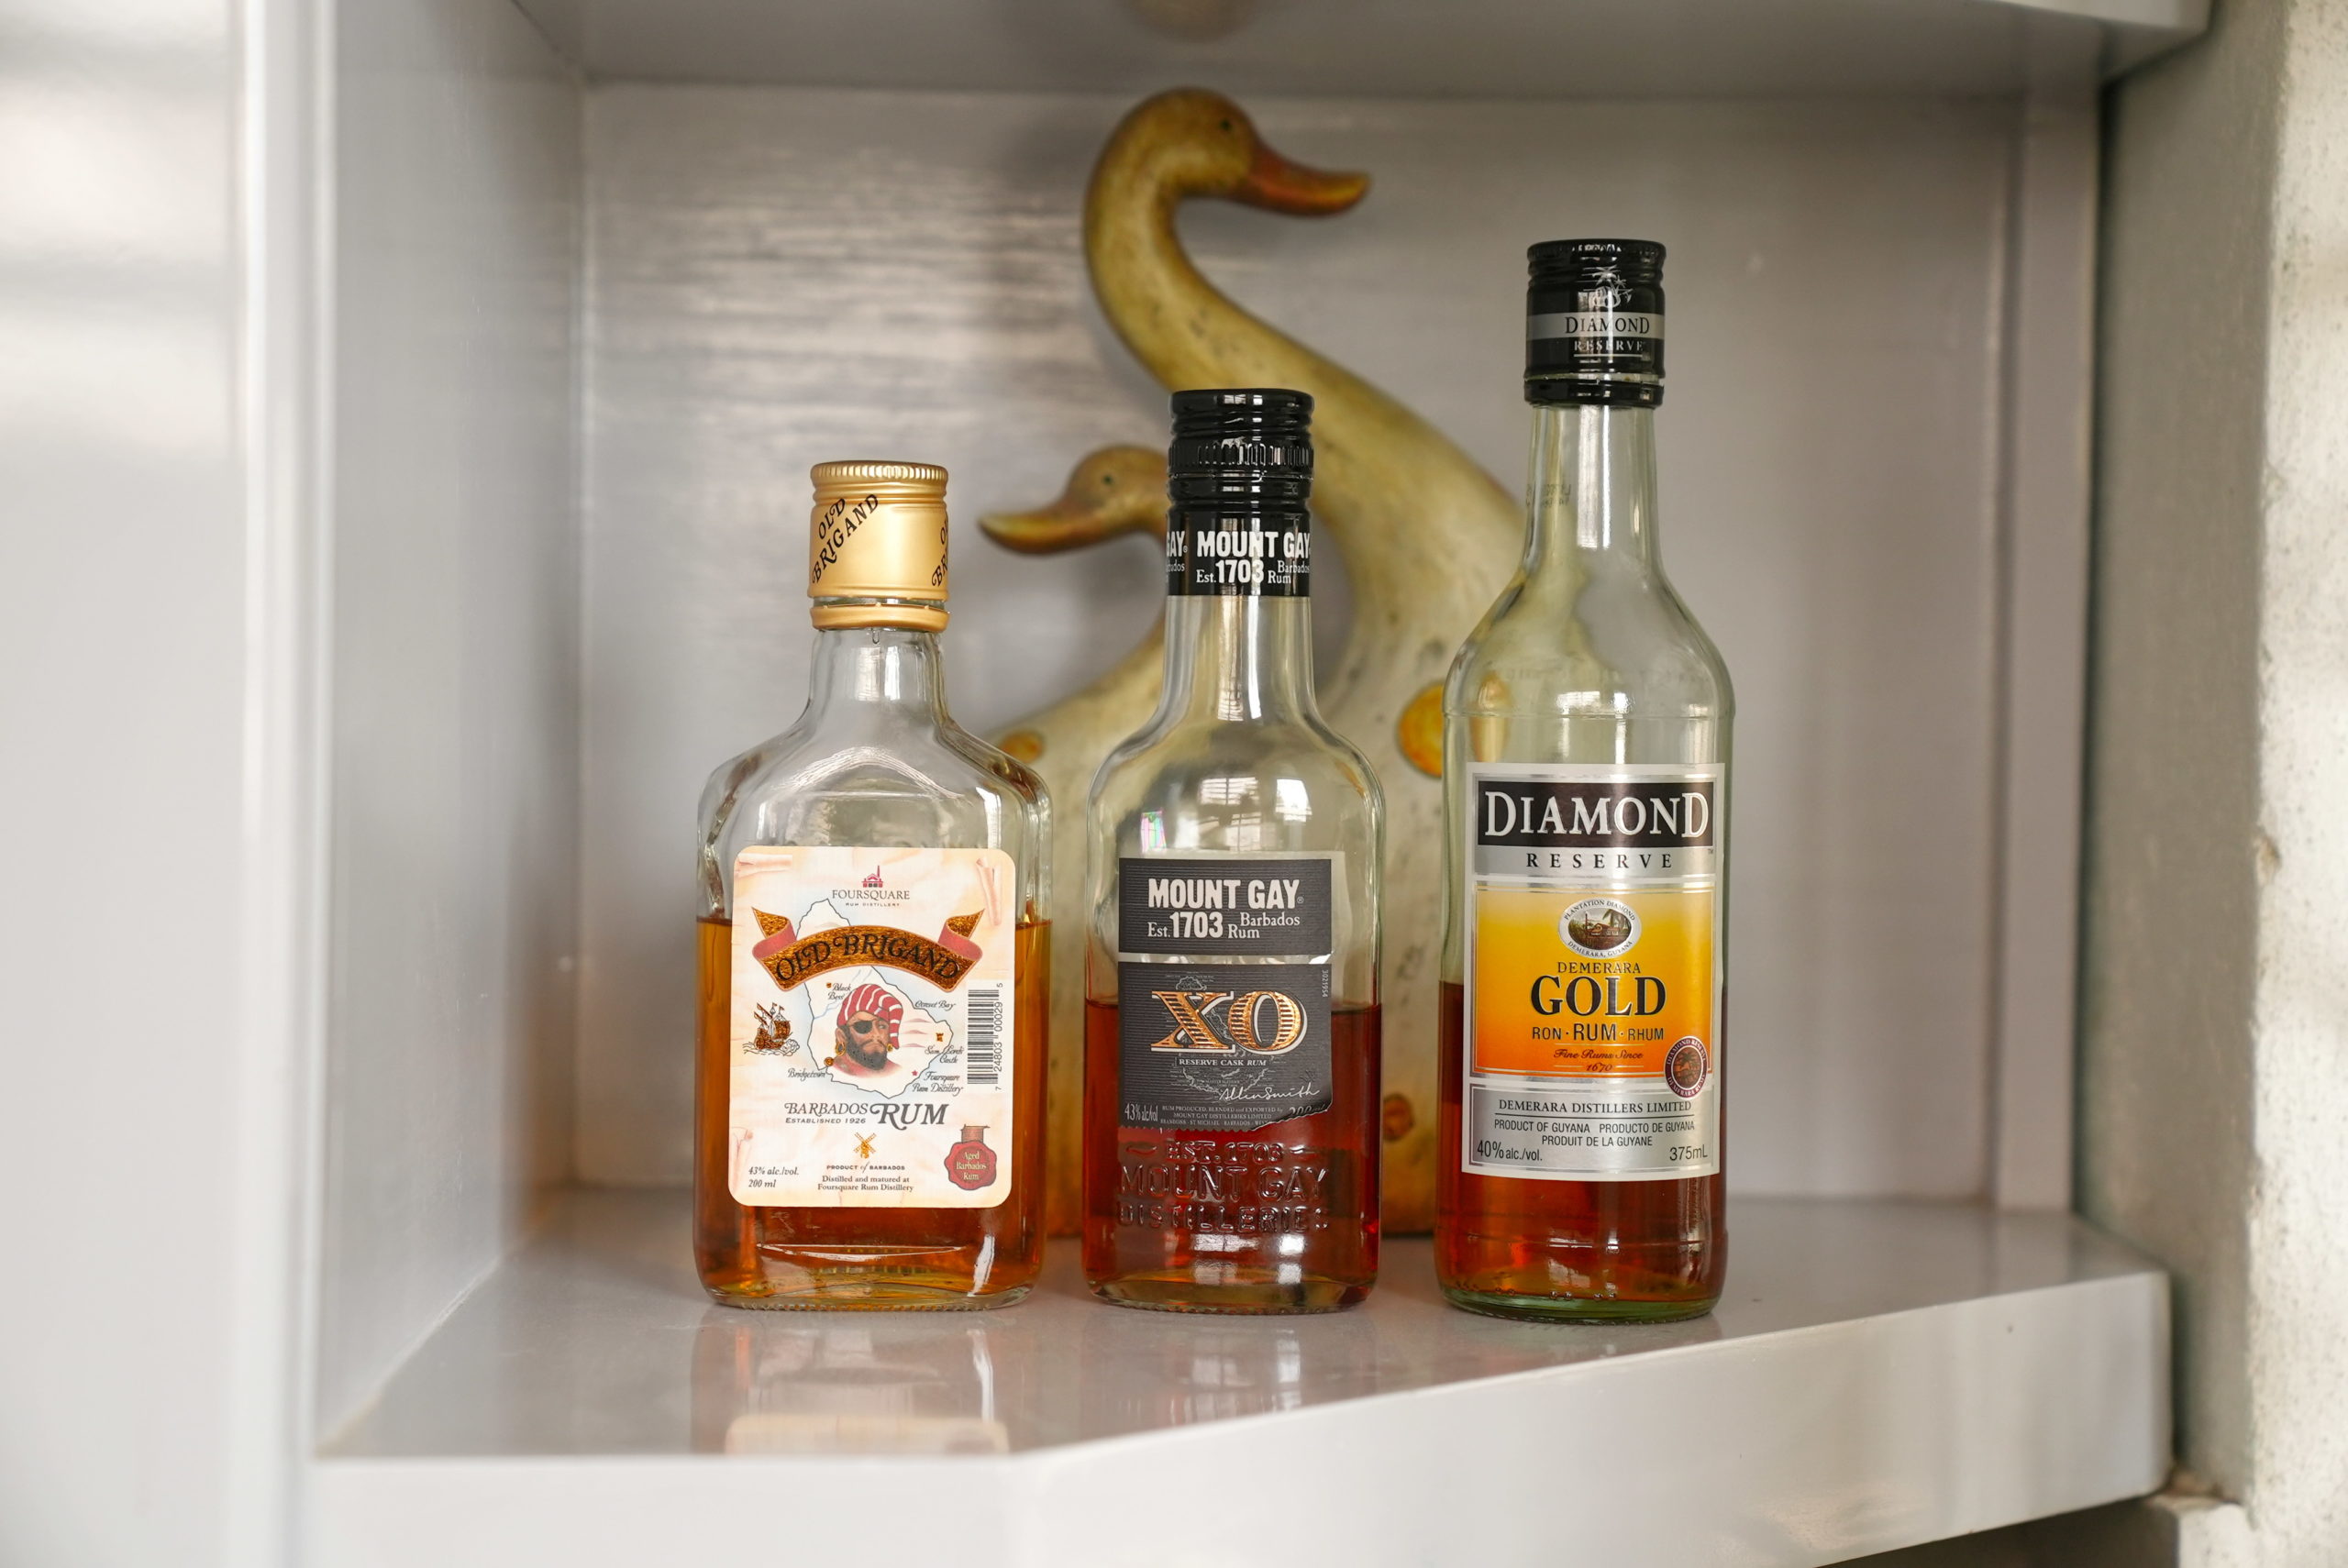 A fine selection of rum.